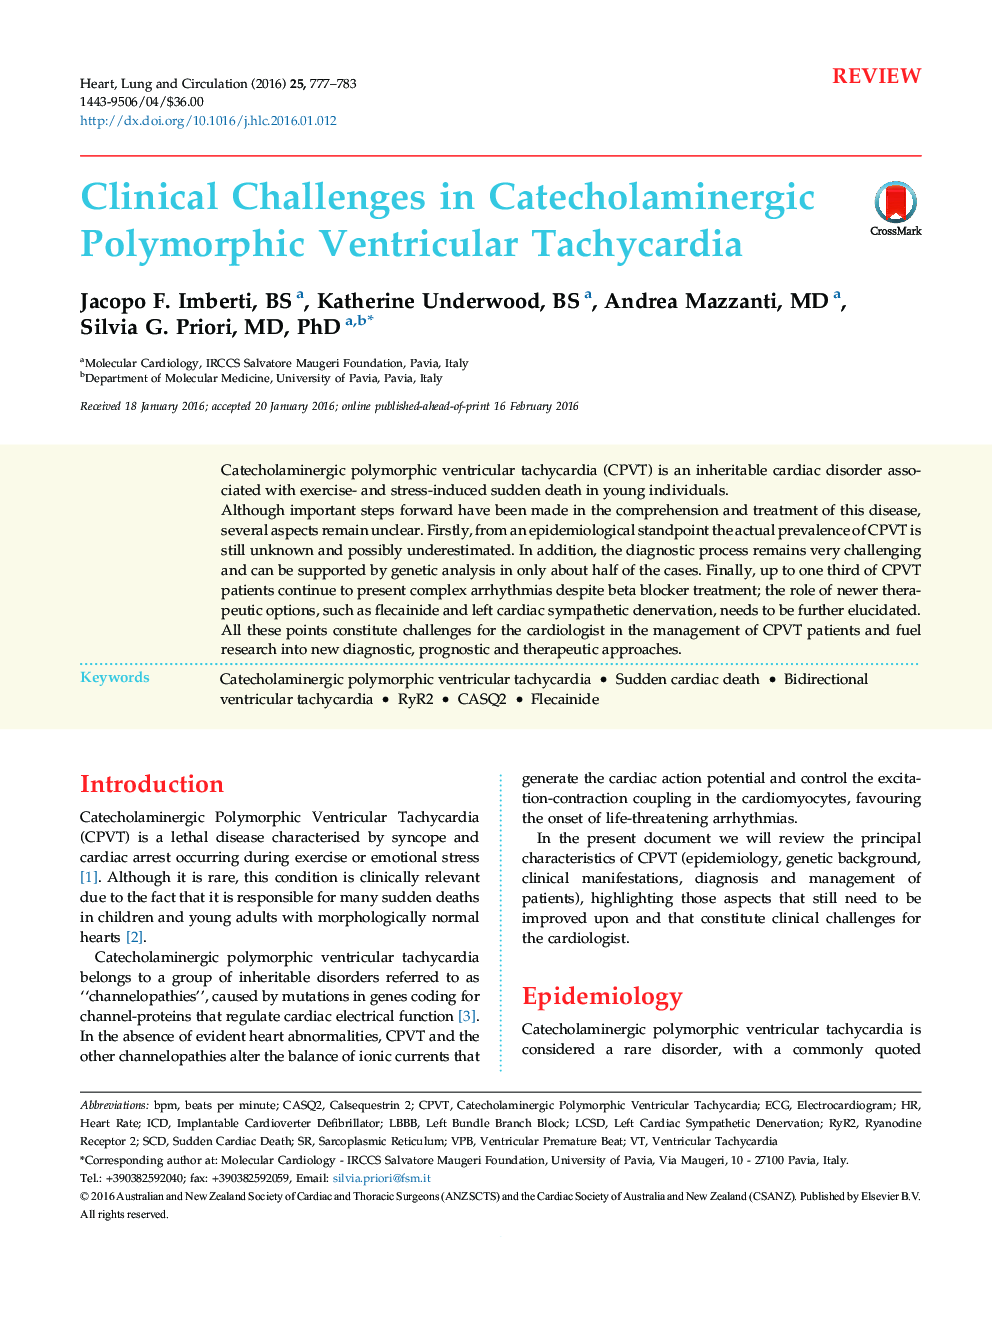 Clinical Challenges in Catecholaminergic Polymorphic Ventricular Tachycardia